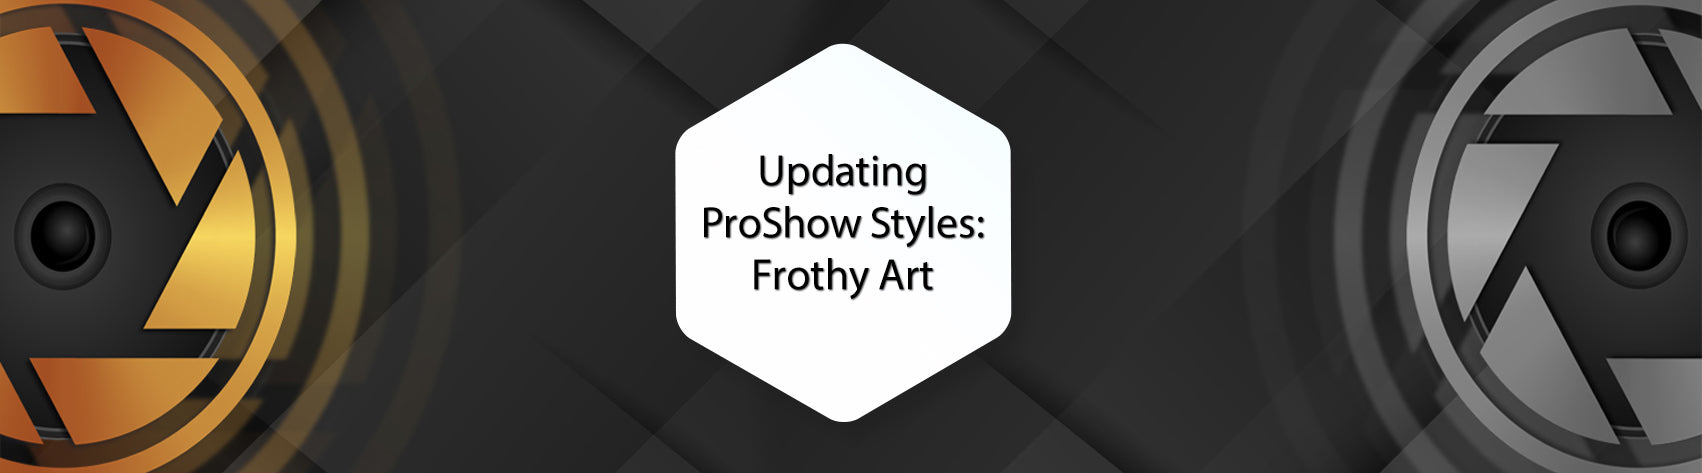 Updating ProShow Files - Frothy Art